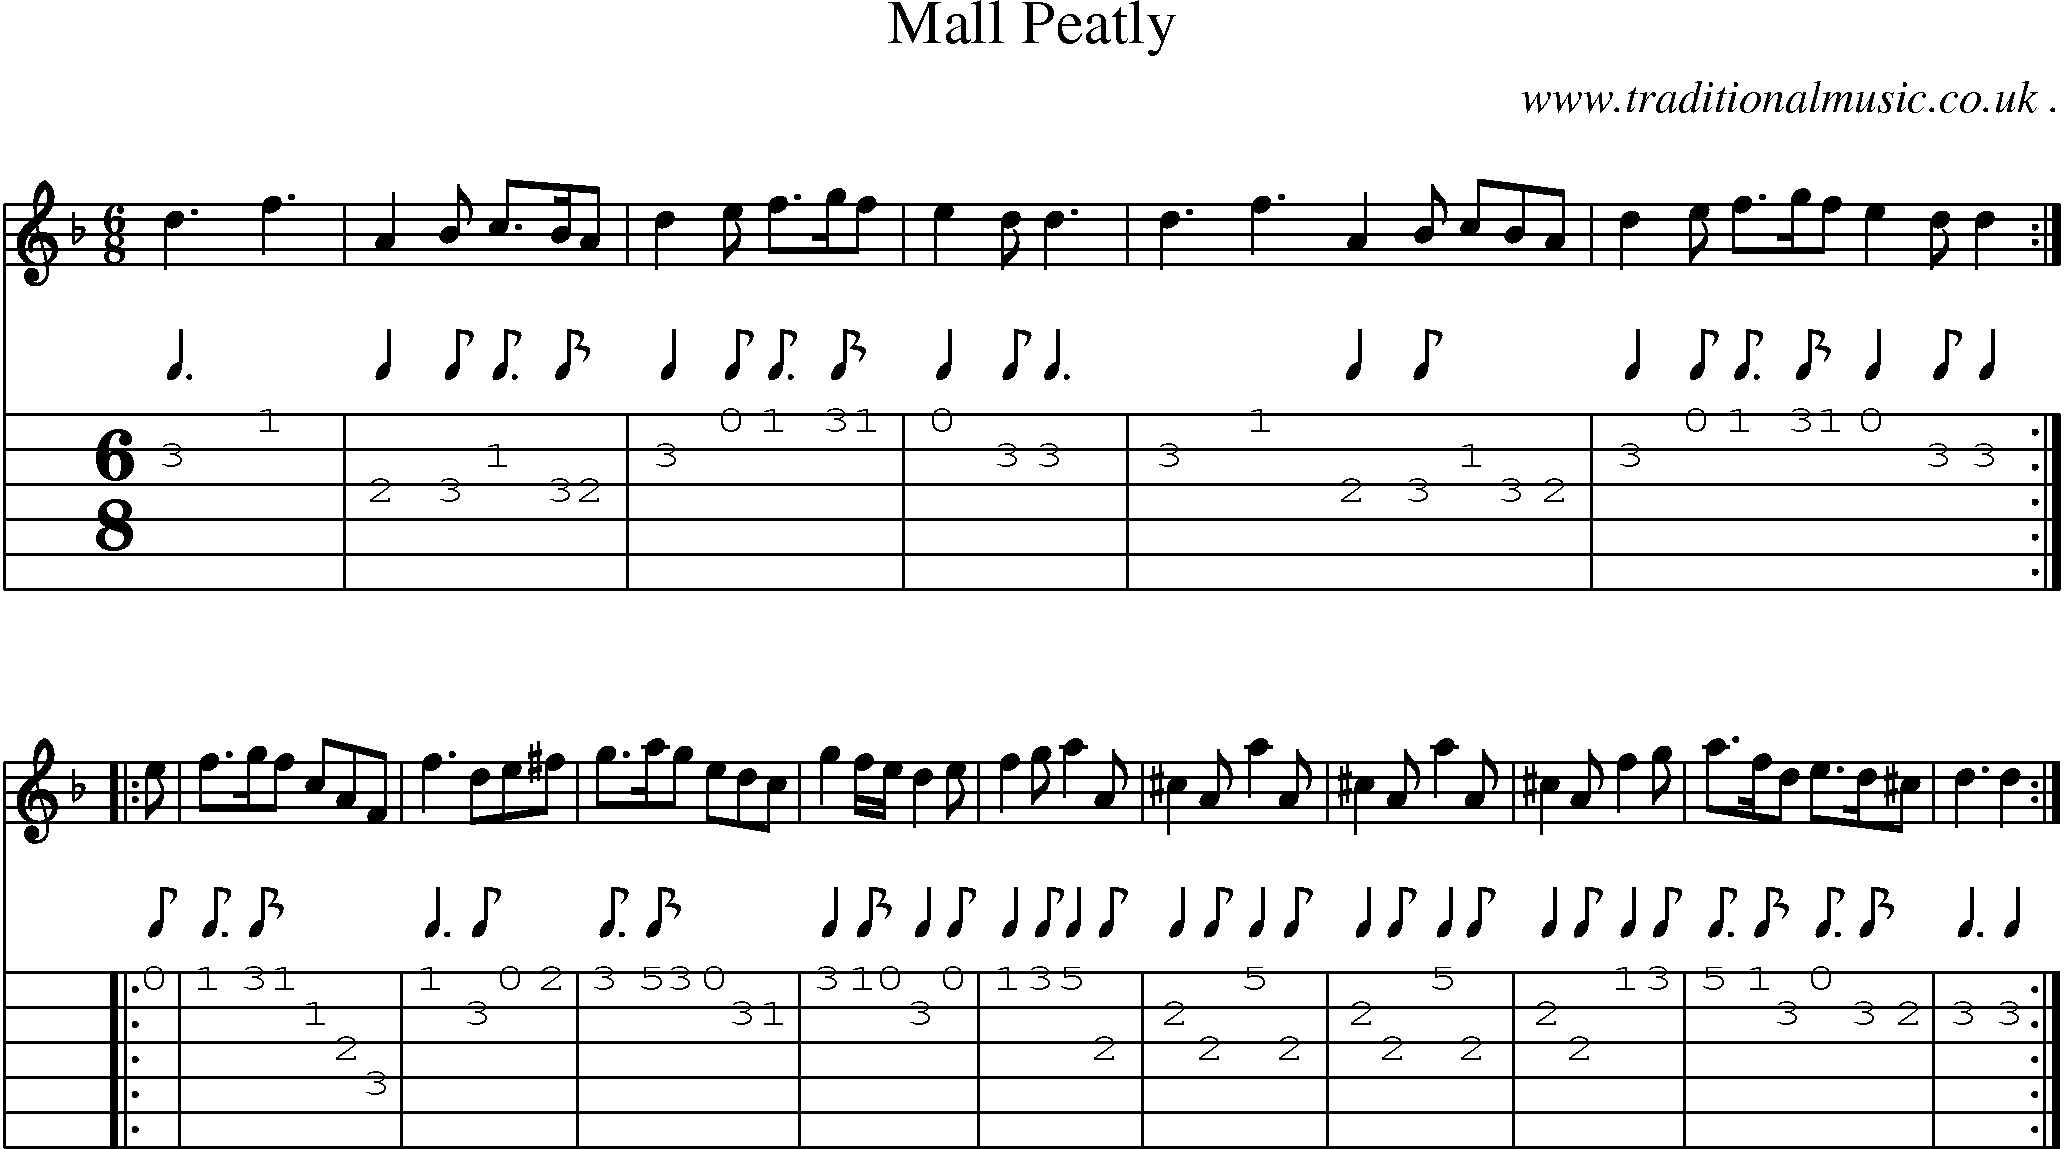 Sheet-Music and Guitar Tabs for Mall Peatly